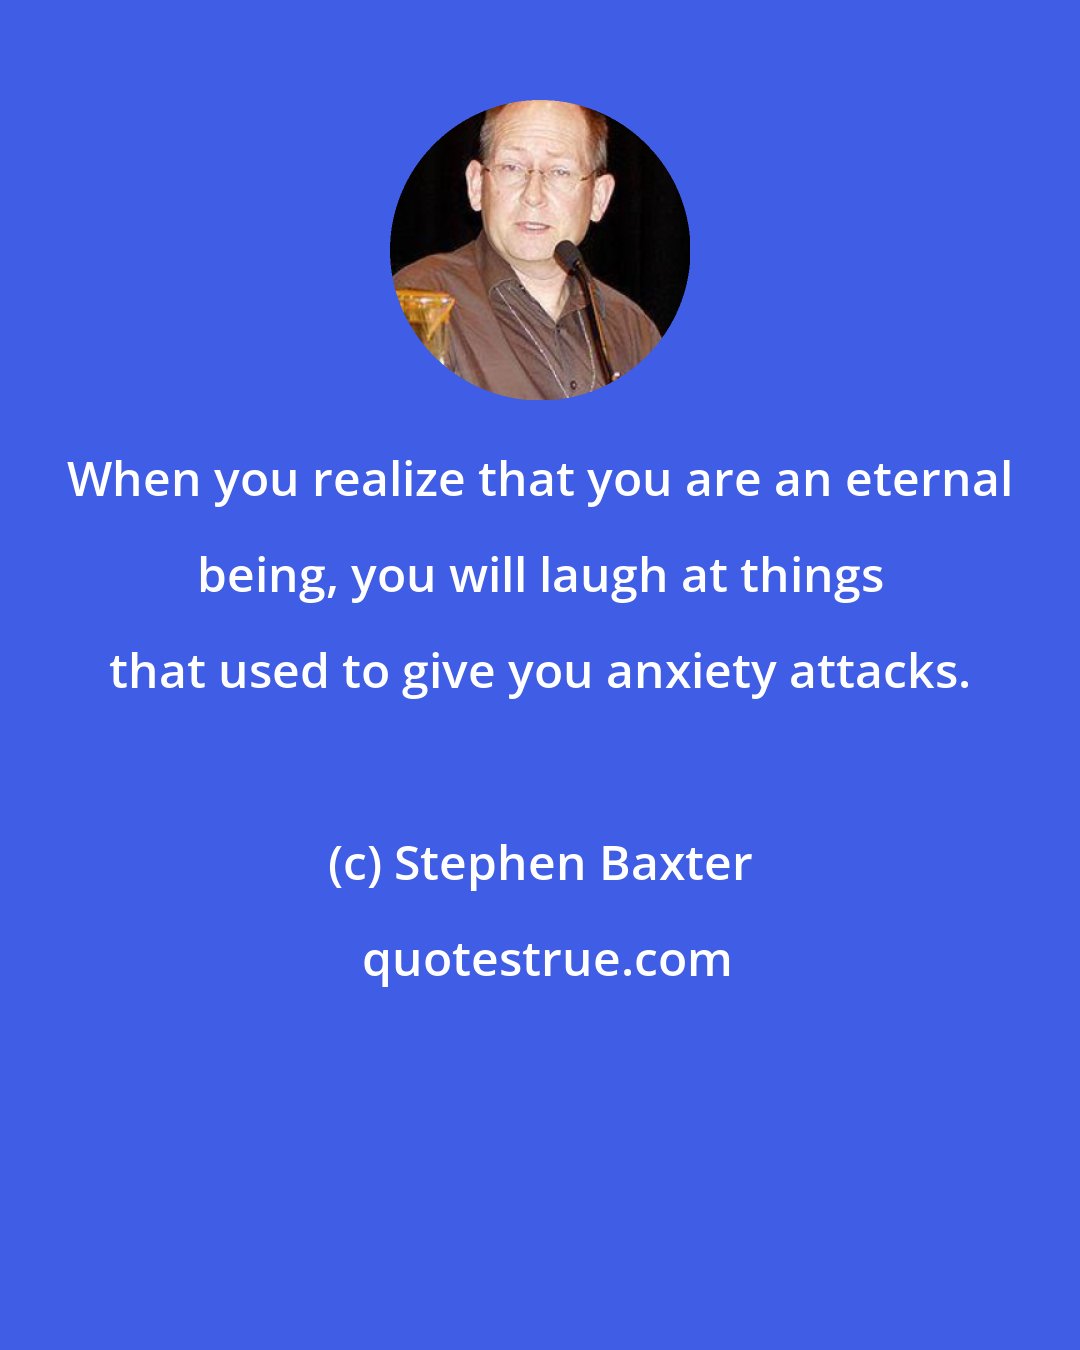 Stephen Baxter: When you realize that you are an eternal being, you will laugh at things that used to give you anxiety attacks.